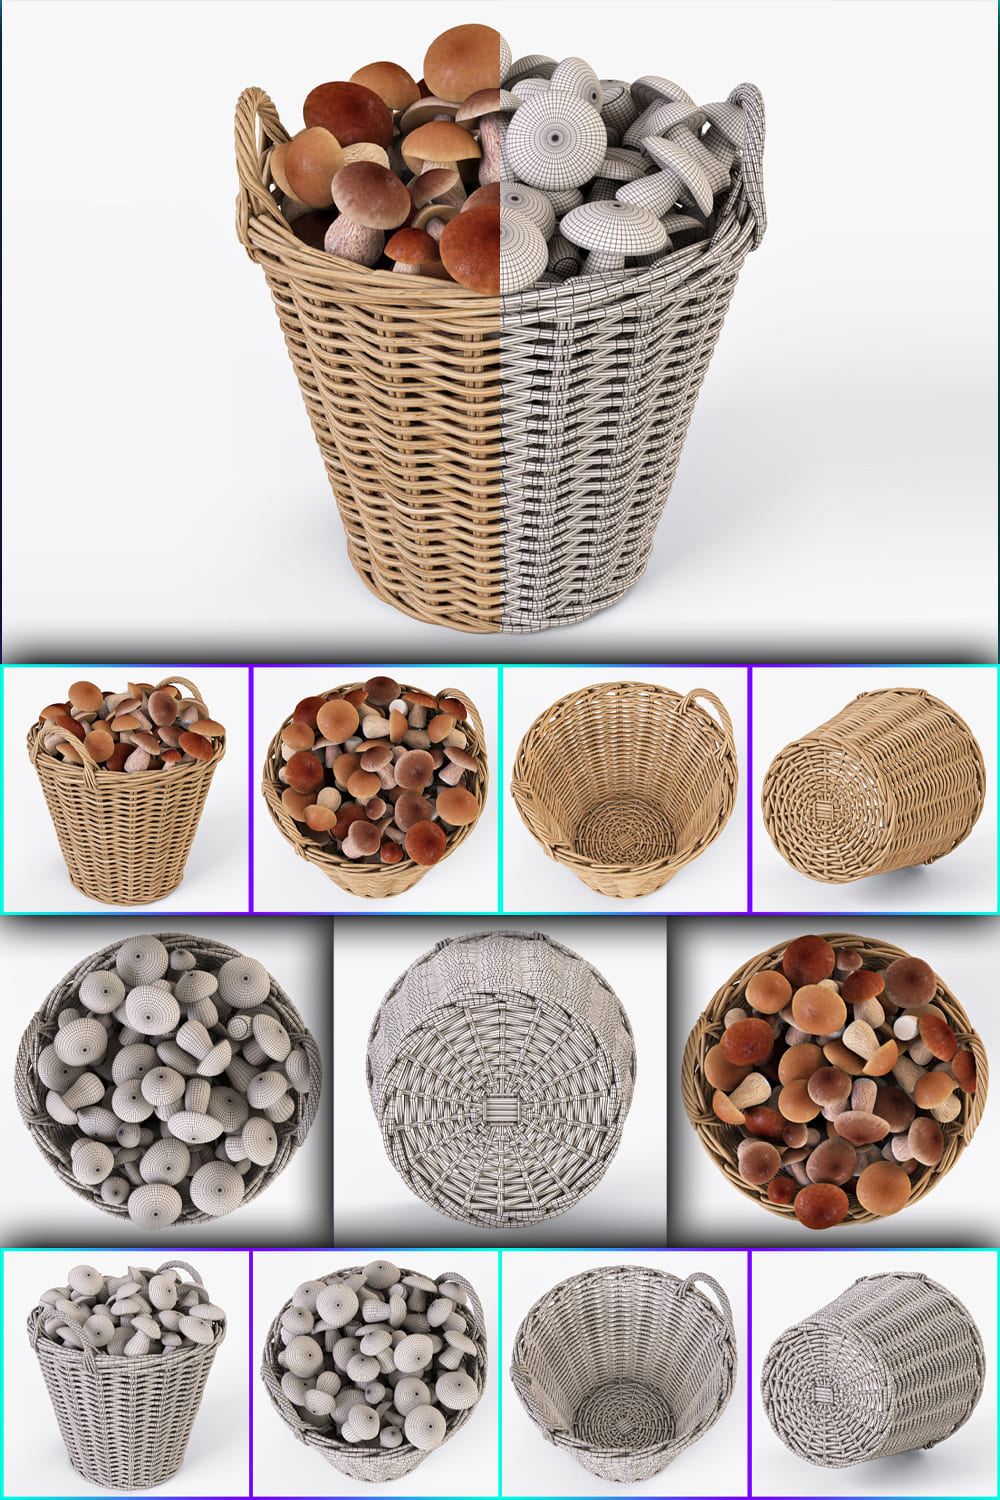 3D model of basket with mushrooms in brown and gray.